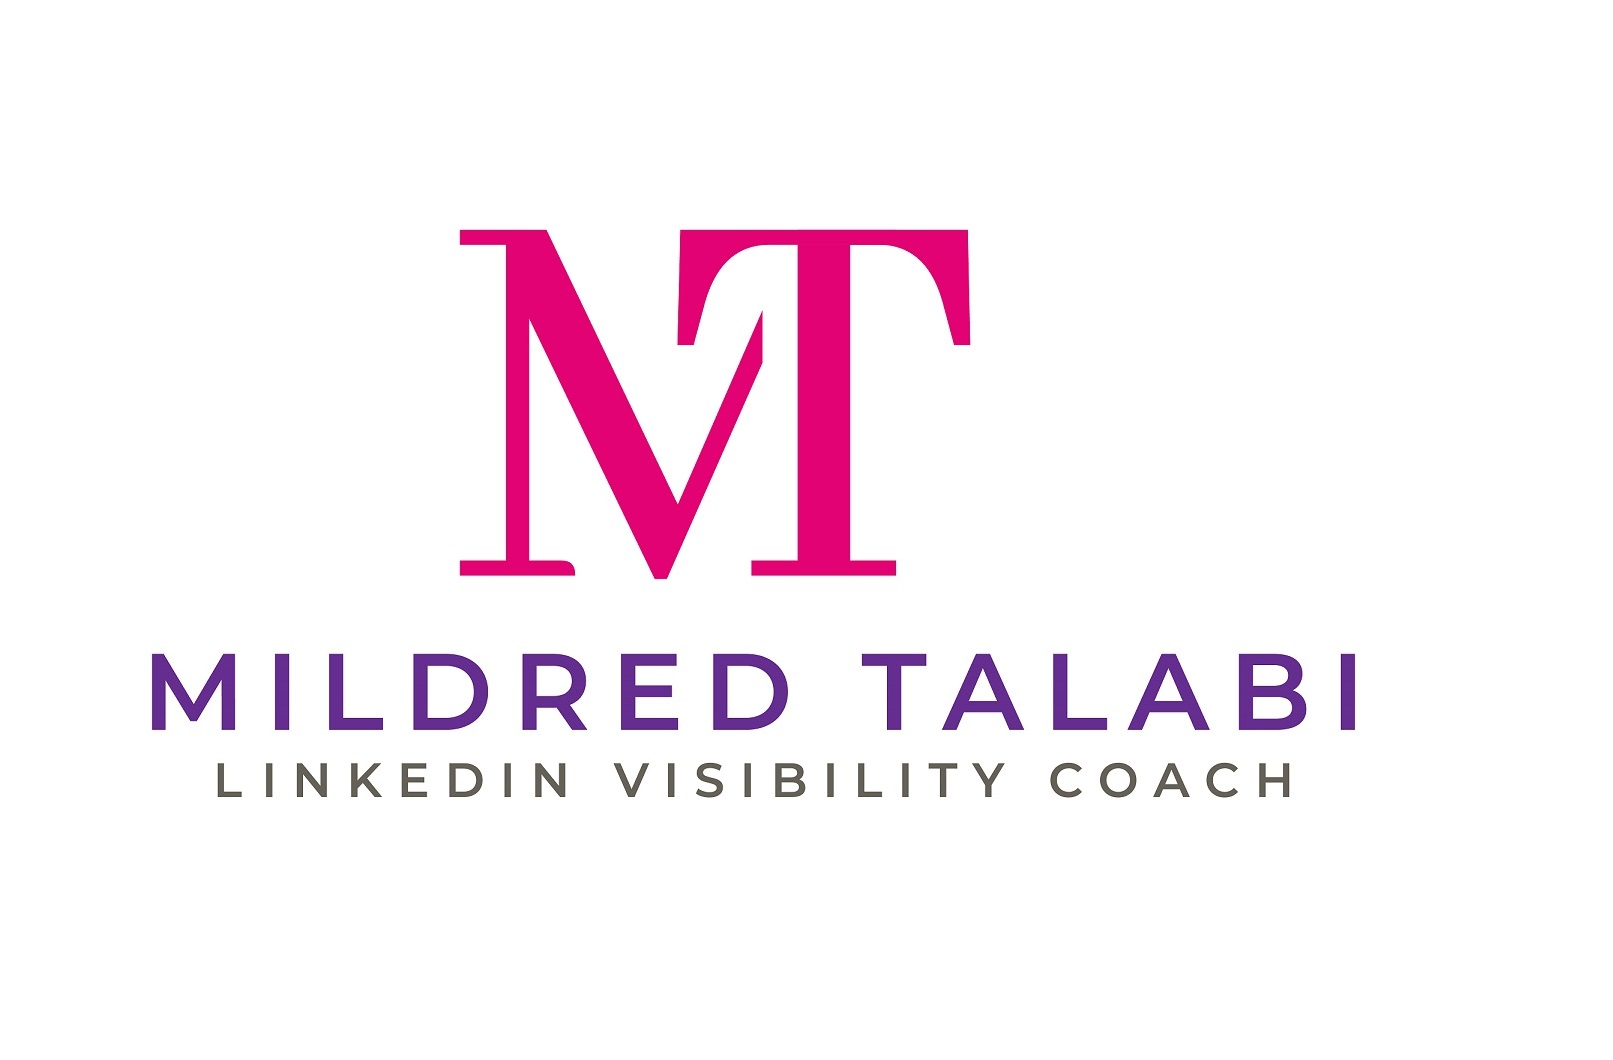 Start Being Visible with Mildred Talabi